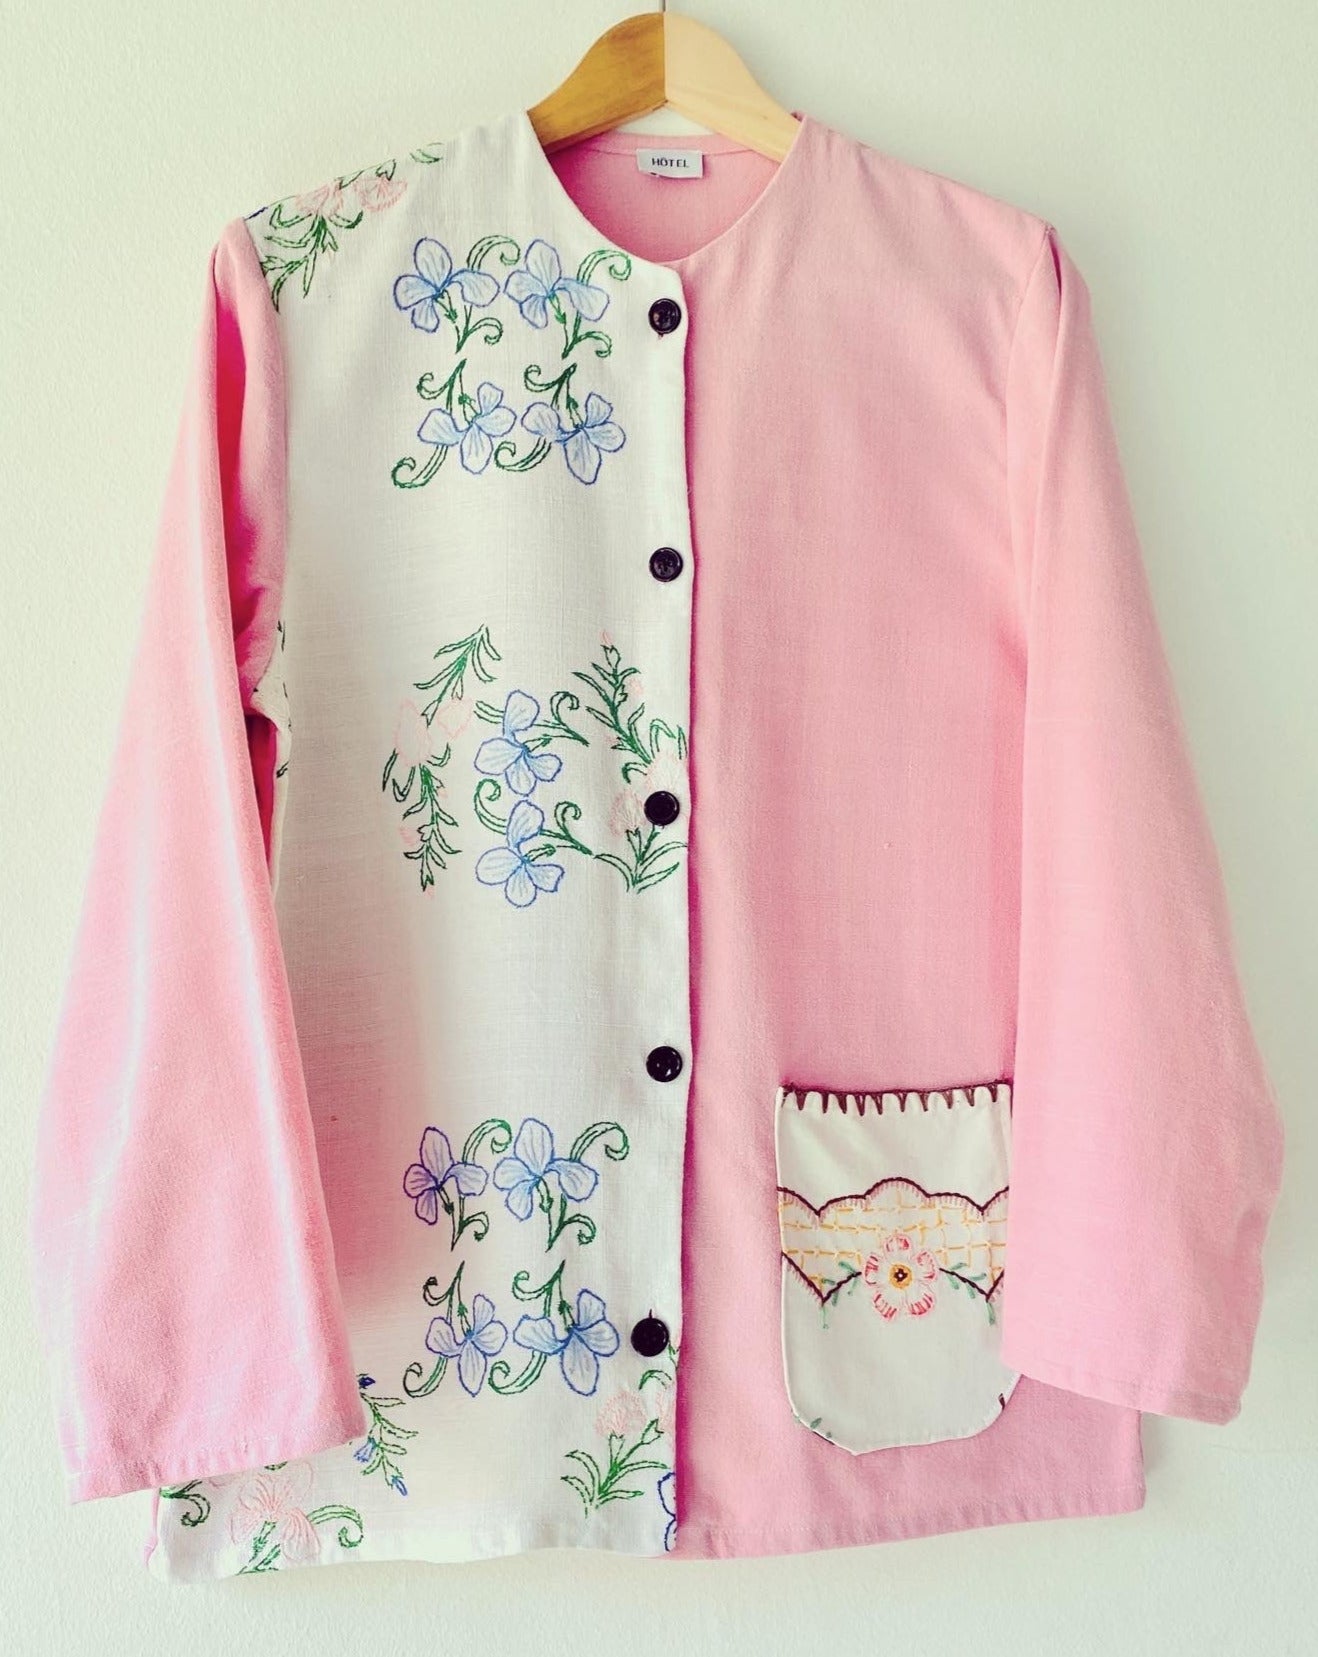 Grand Amour embroidered jacket